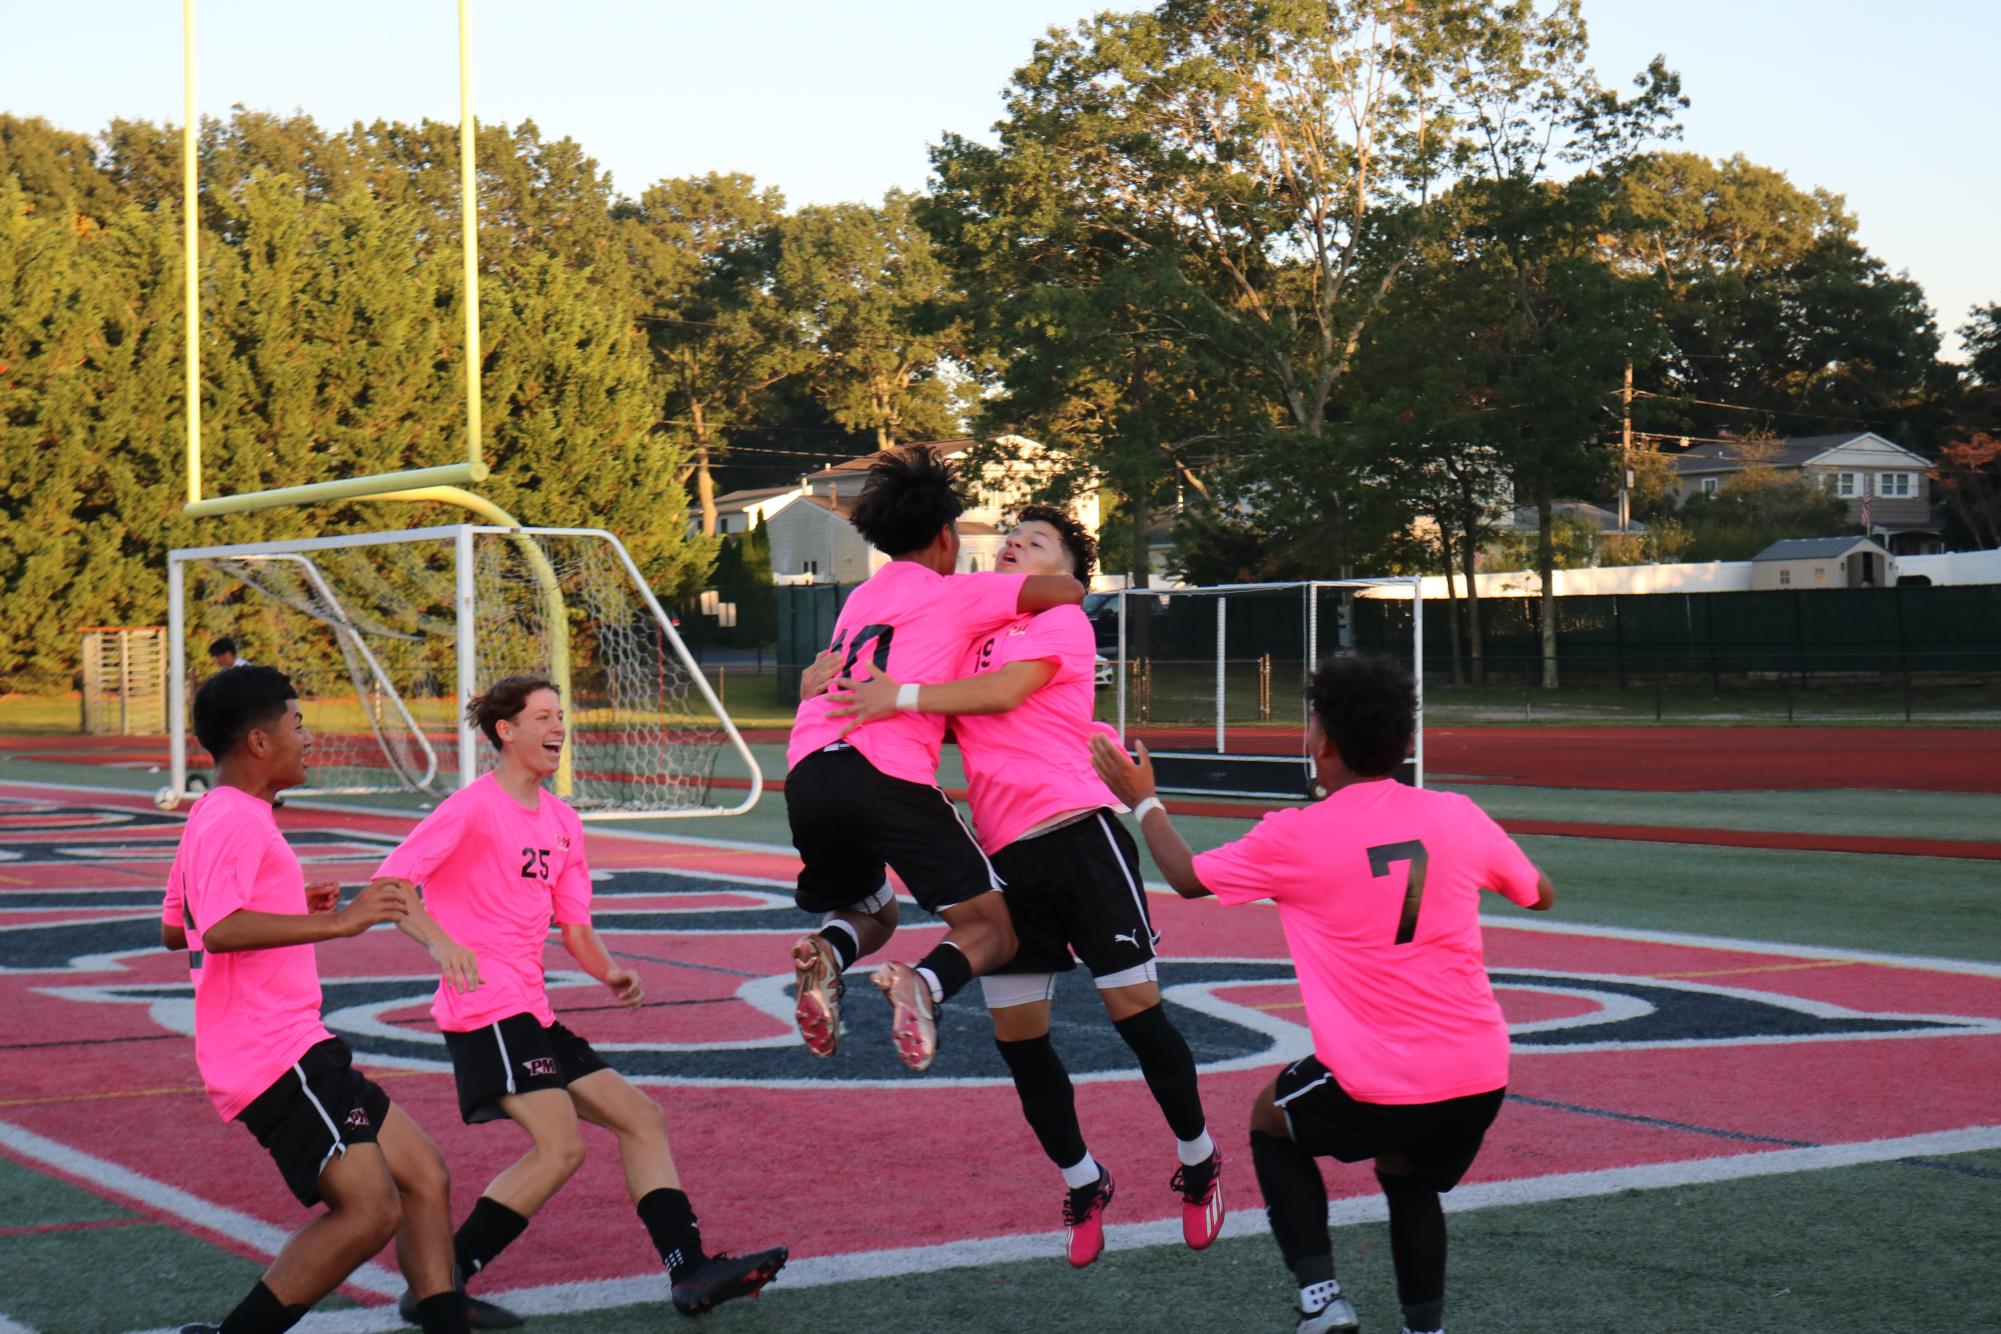 Senior Jasson Guzman (Center, #19) celebrates with his teammates after scoring a goal to secure the Raiders a 5-1 victory against Riverhead.